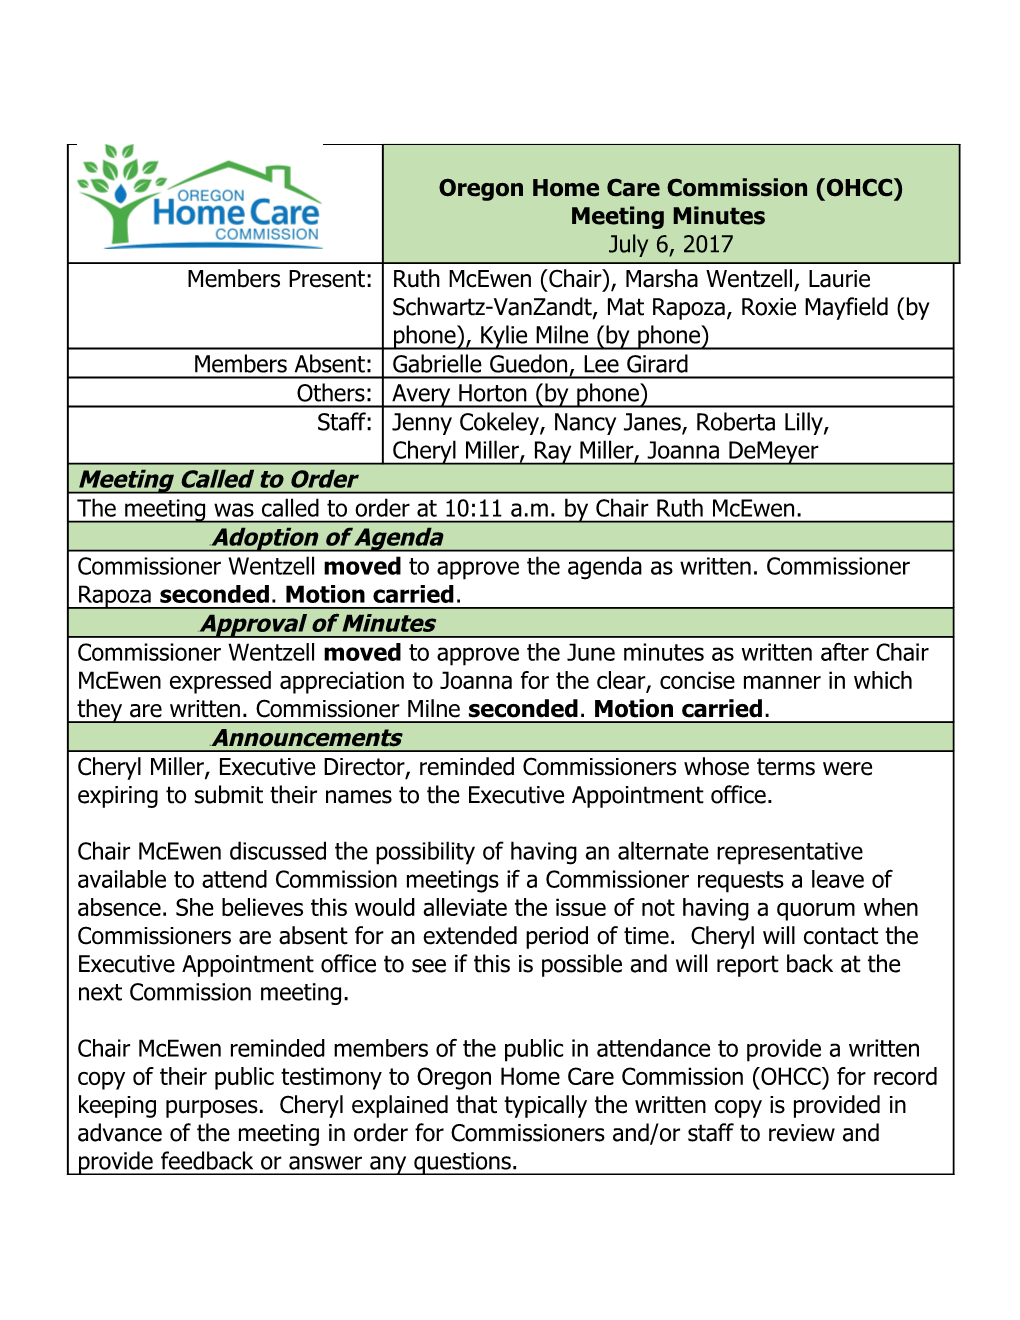 Home Care Commission Minutes July 6 2017